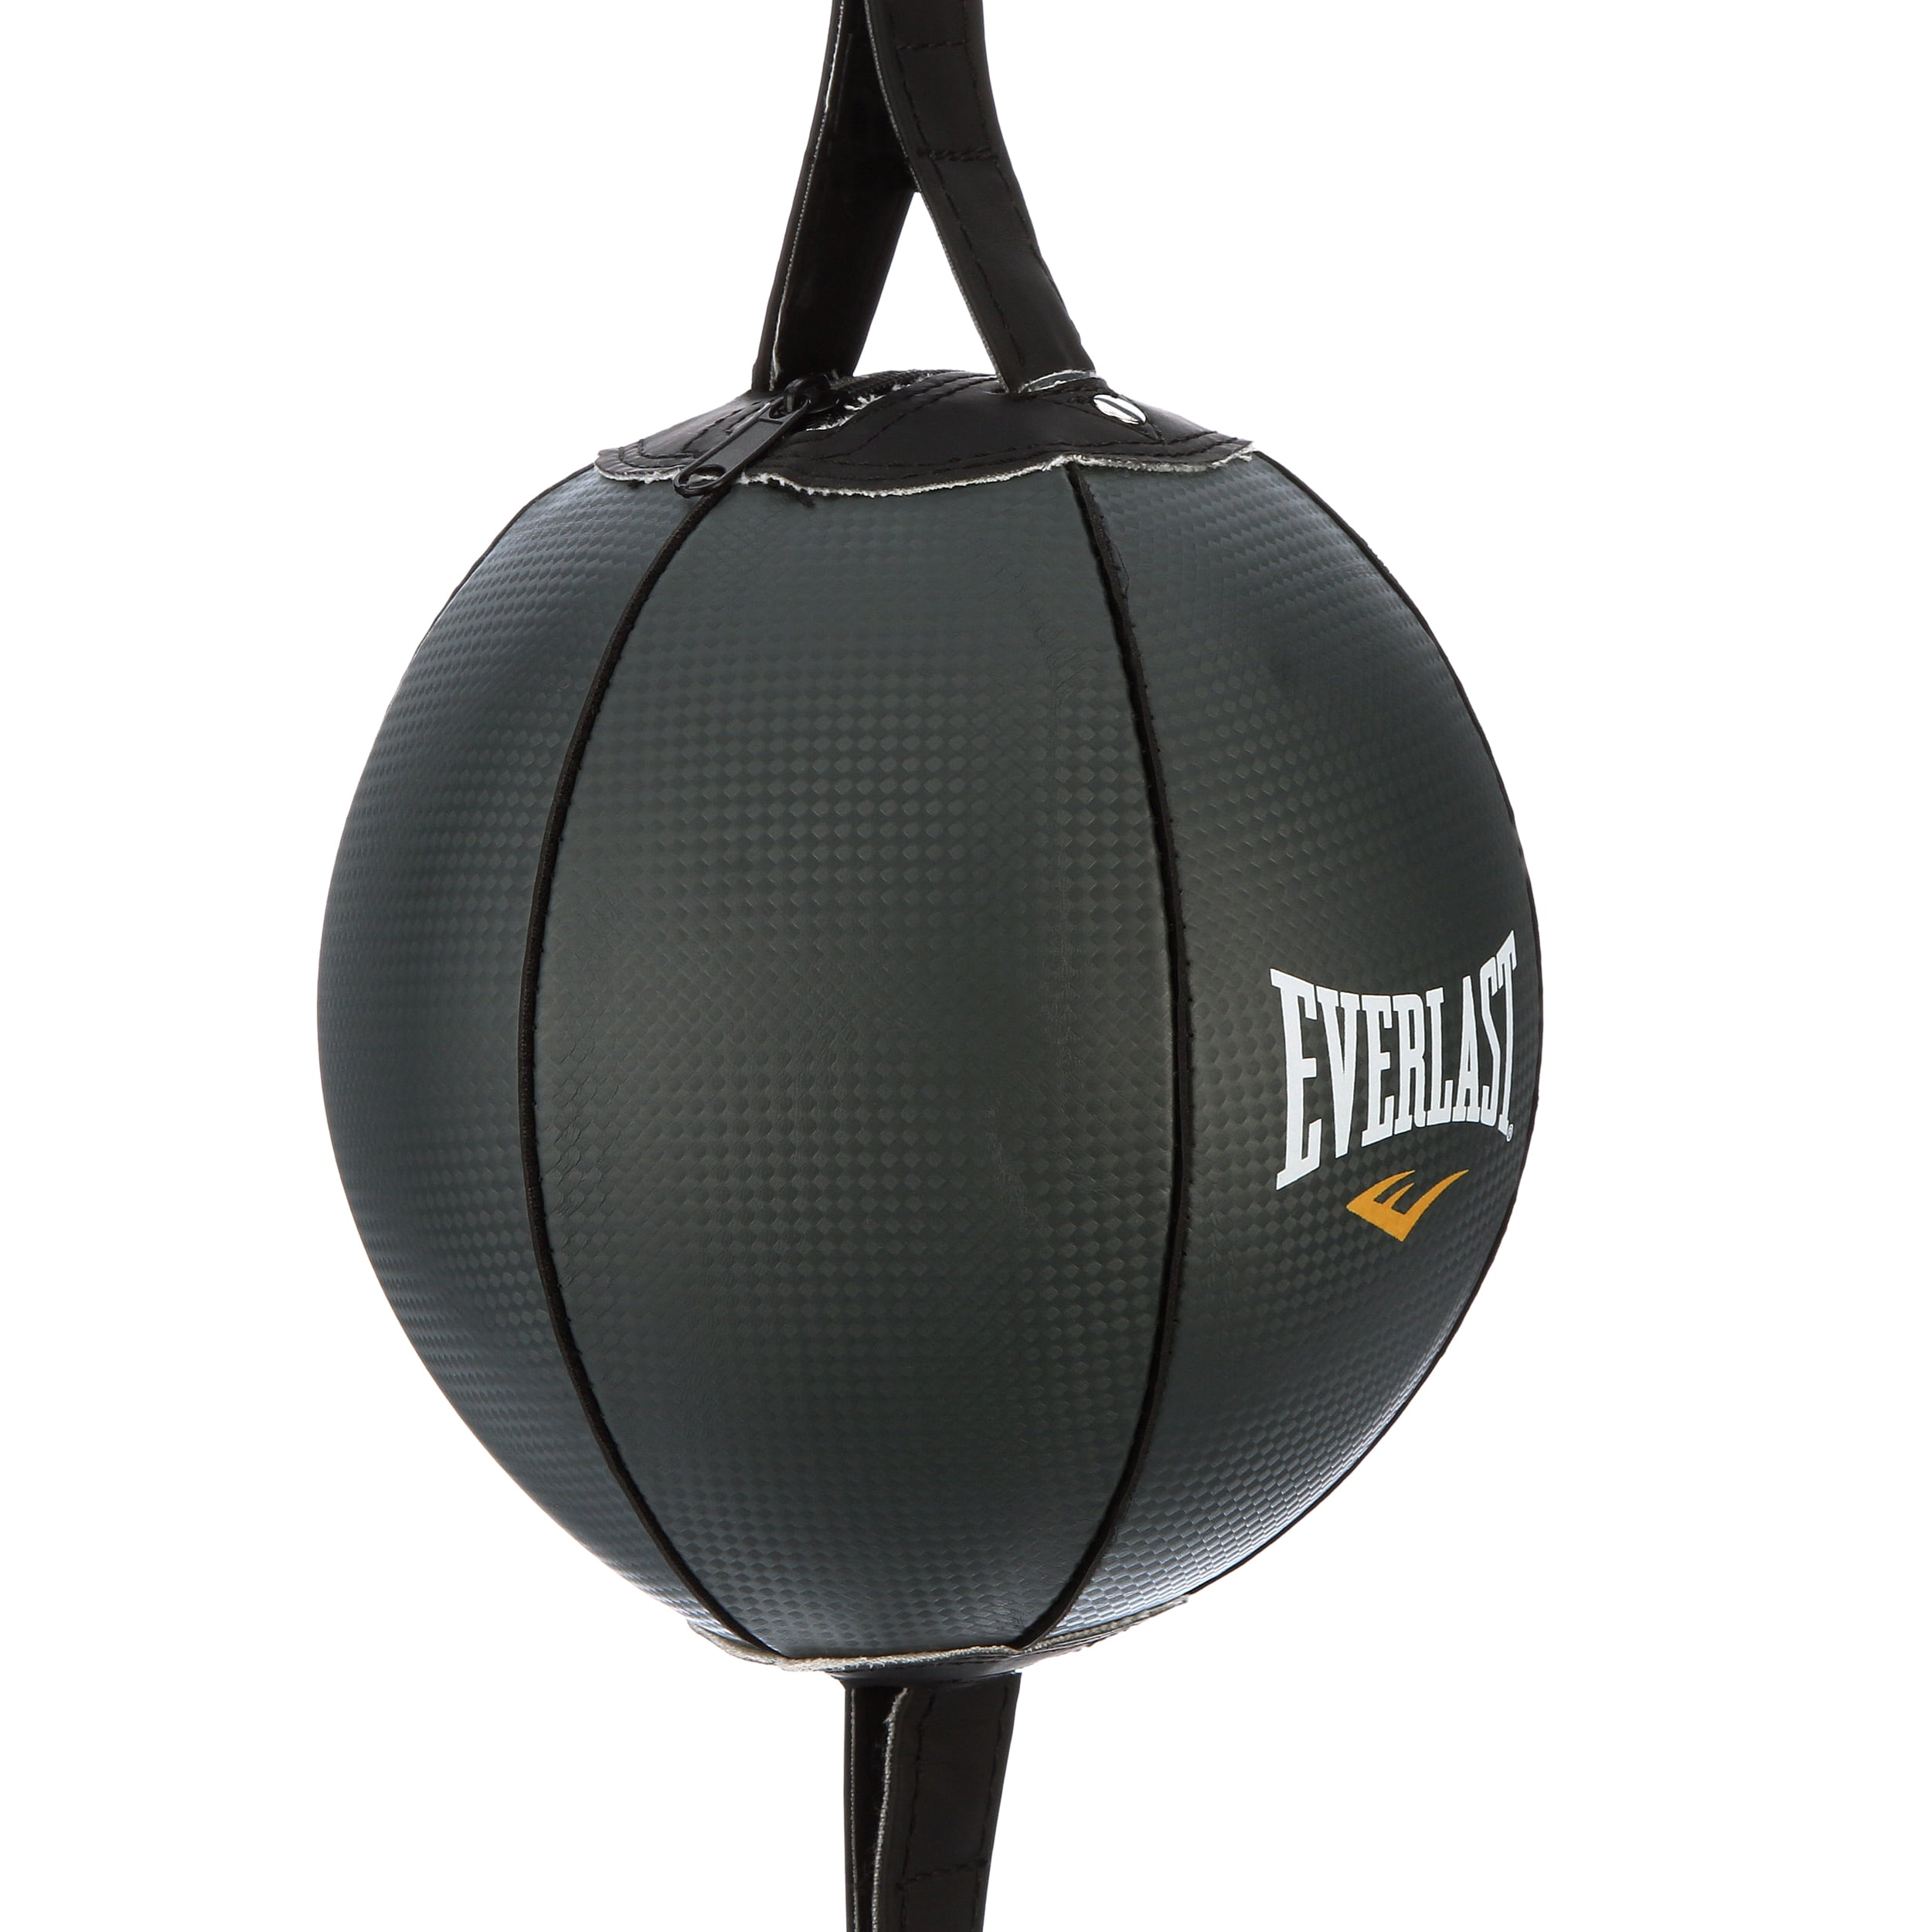 Everlast Double End Striking Bag Free Shipping 